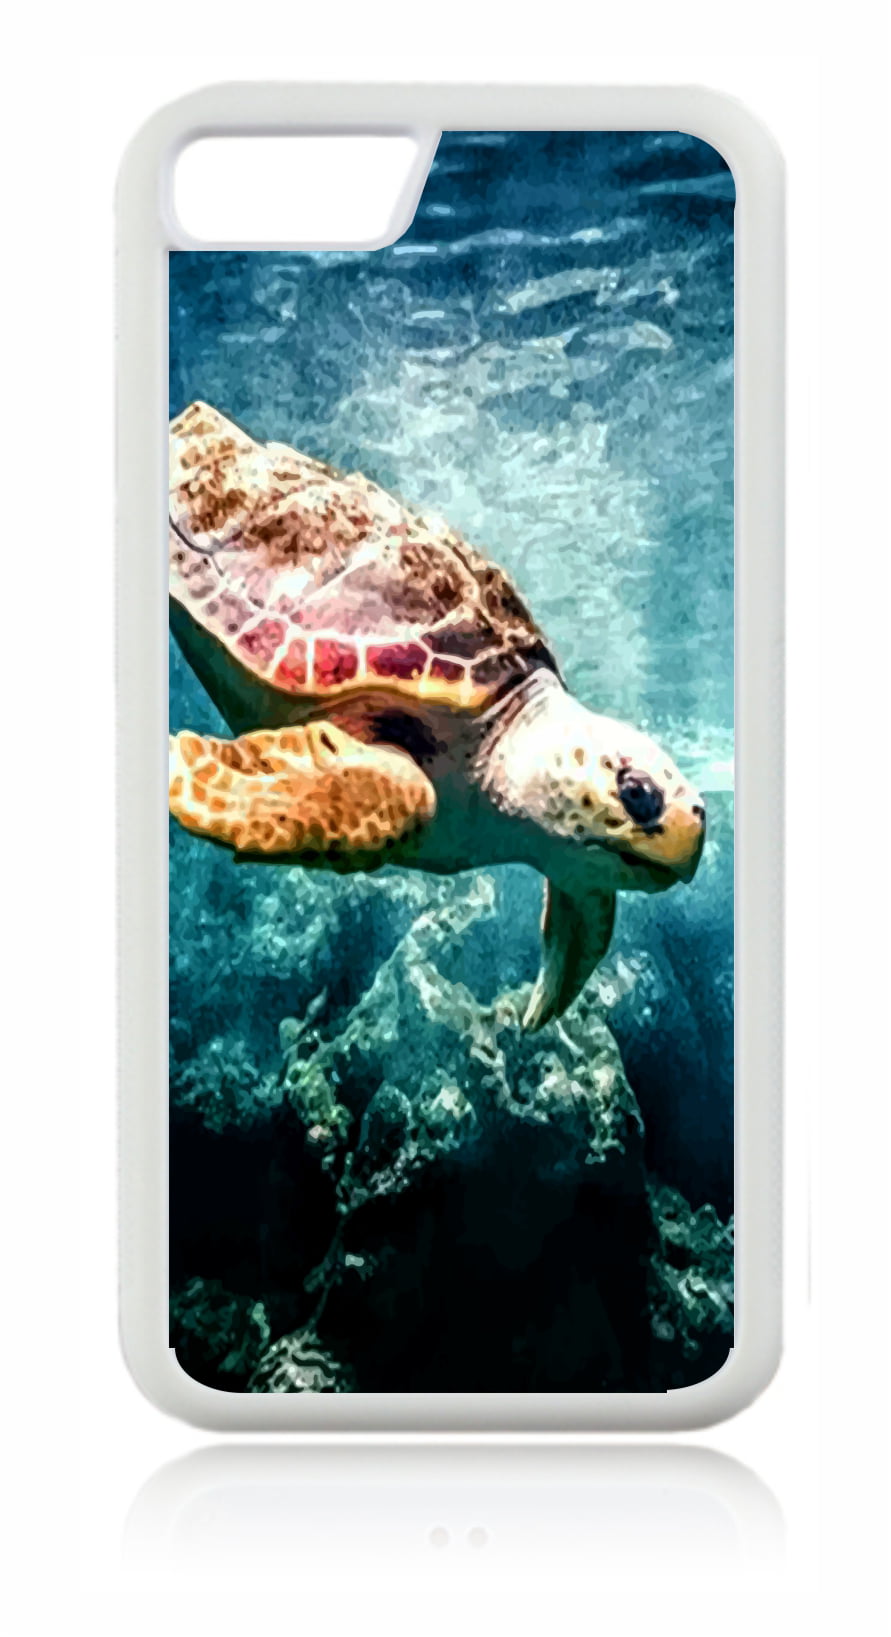 Under the Sea Turtle Design White Rubber Case for the Apple iPhone 6 Plus / iPhone 6s Plus - Apple iPhone 6 Plus Accessories -iPhone 6s Plus Accessories